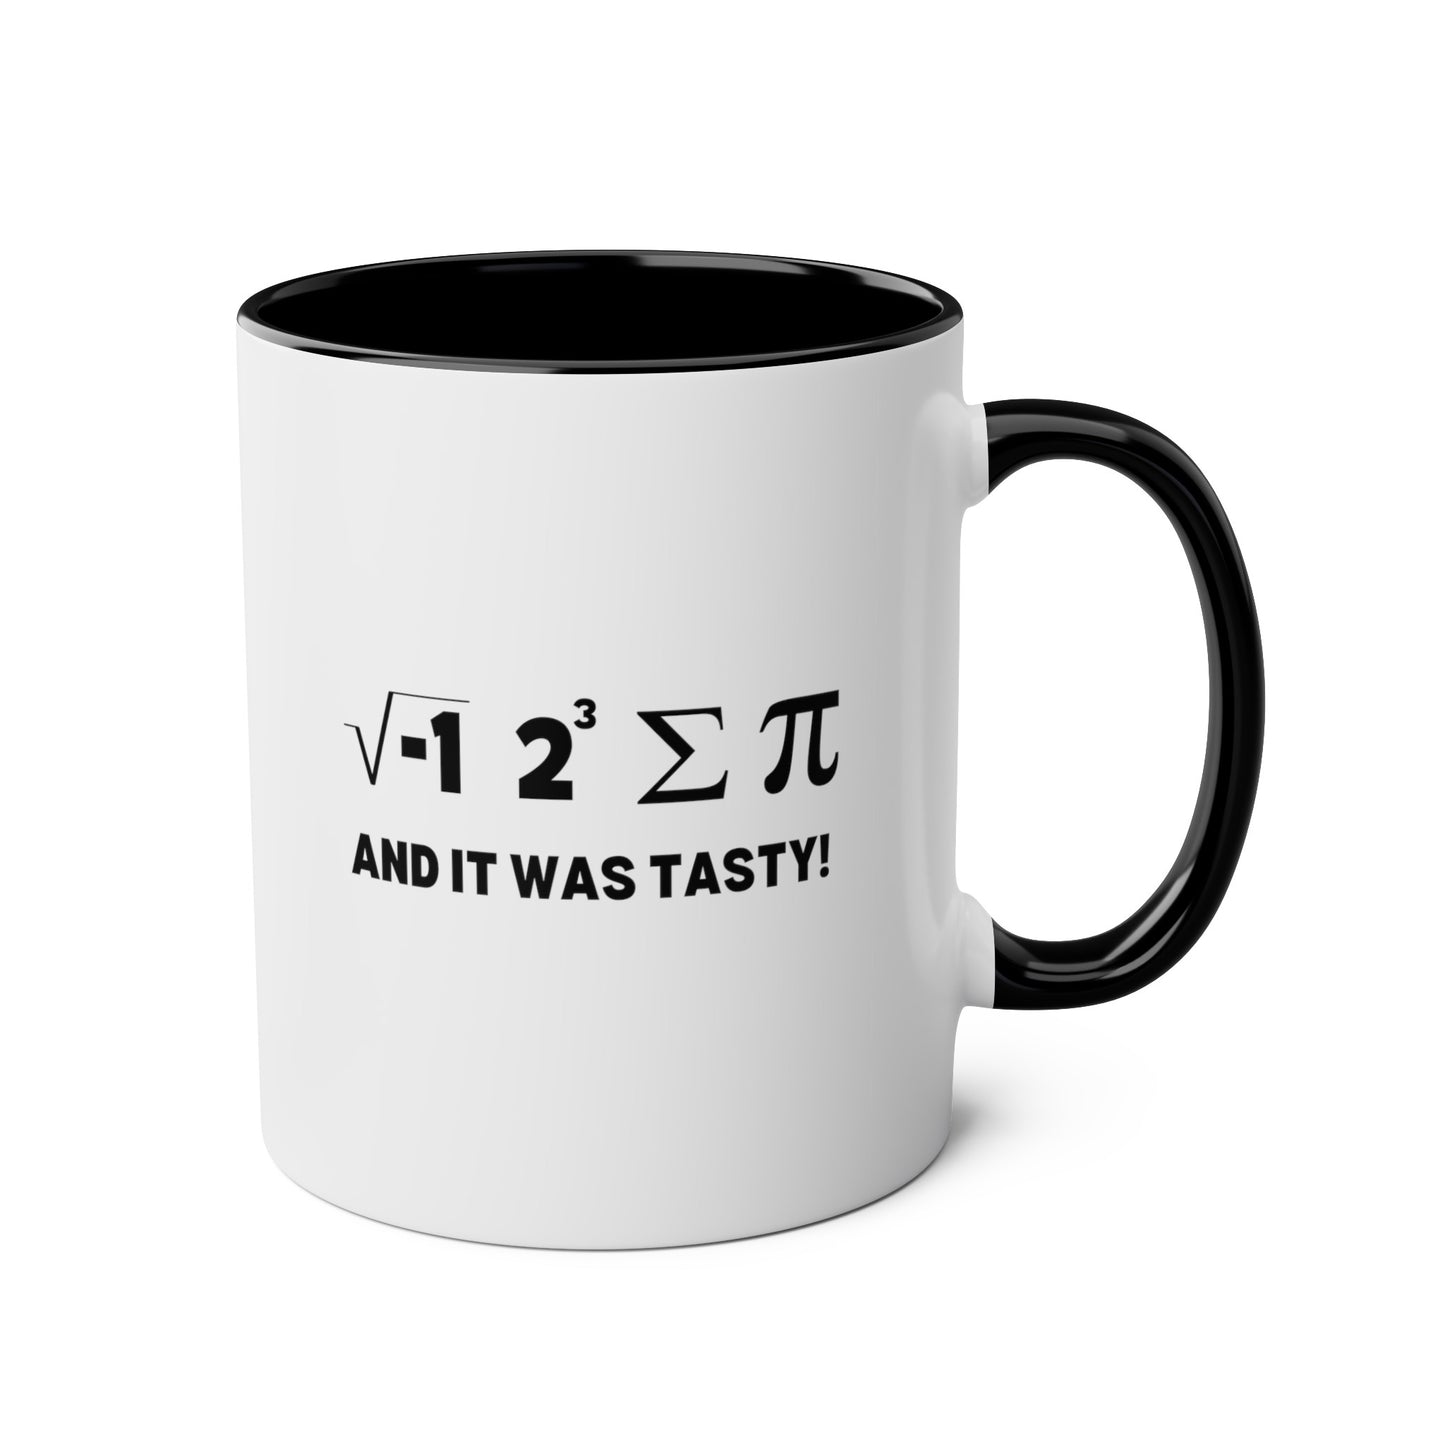 I Ate Some Pie And It Was Tasty 11oz white with black accent funny large coffee mug gift for math lover teacher geek nerdy science nerd novelty equations formula pun waveywares wavey wares wavywares wavy wares